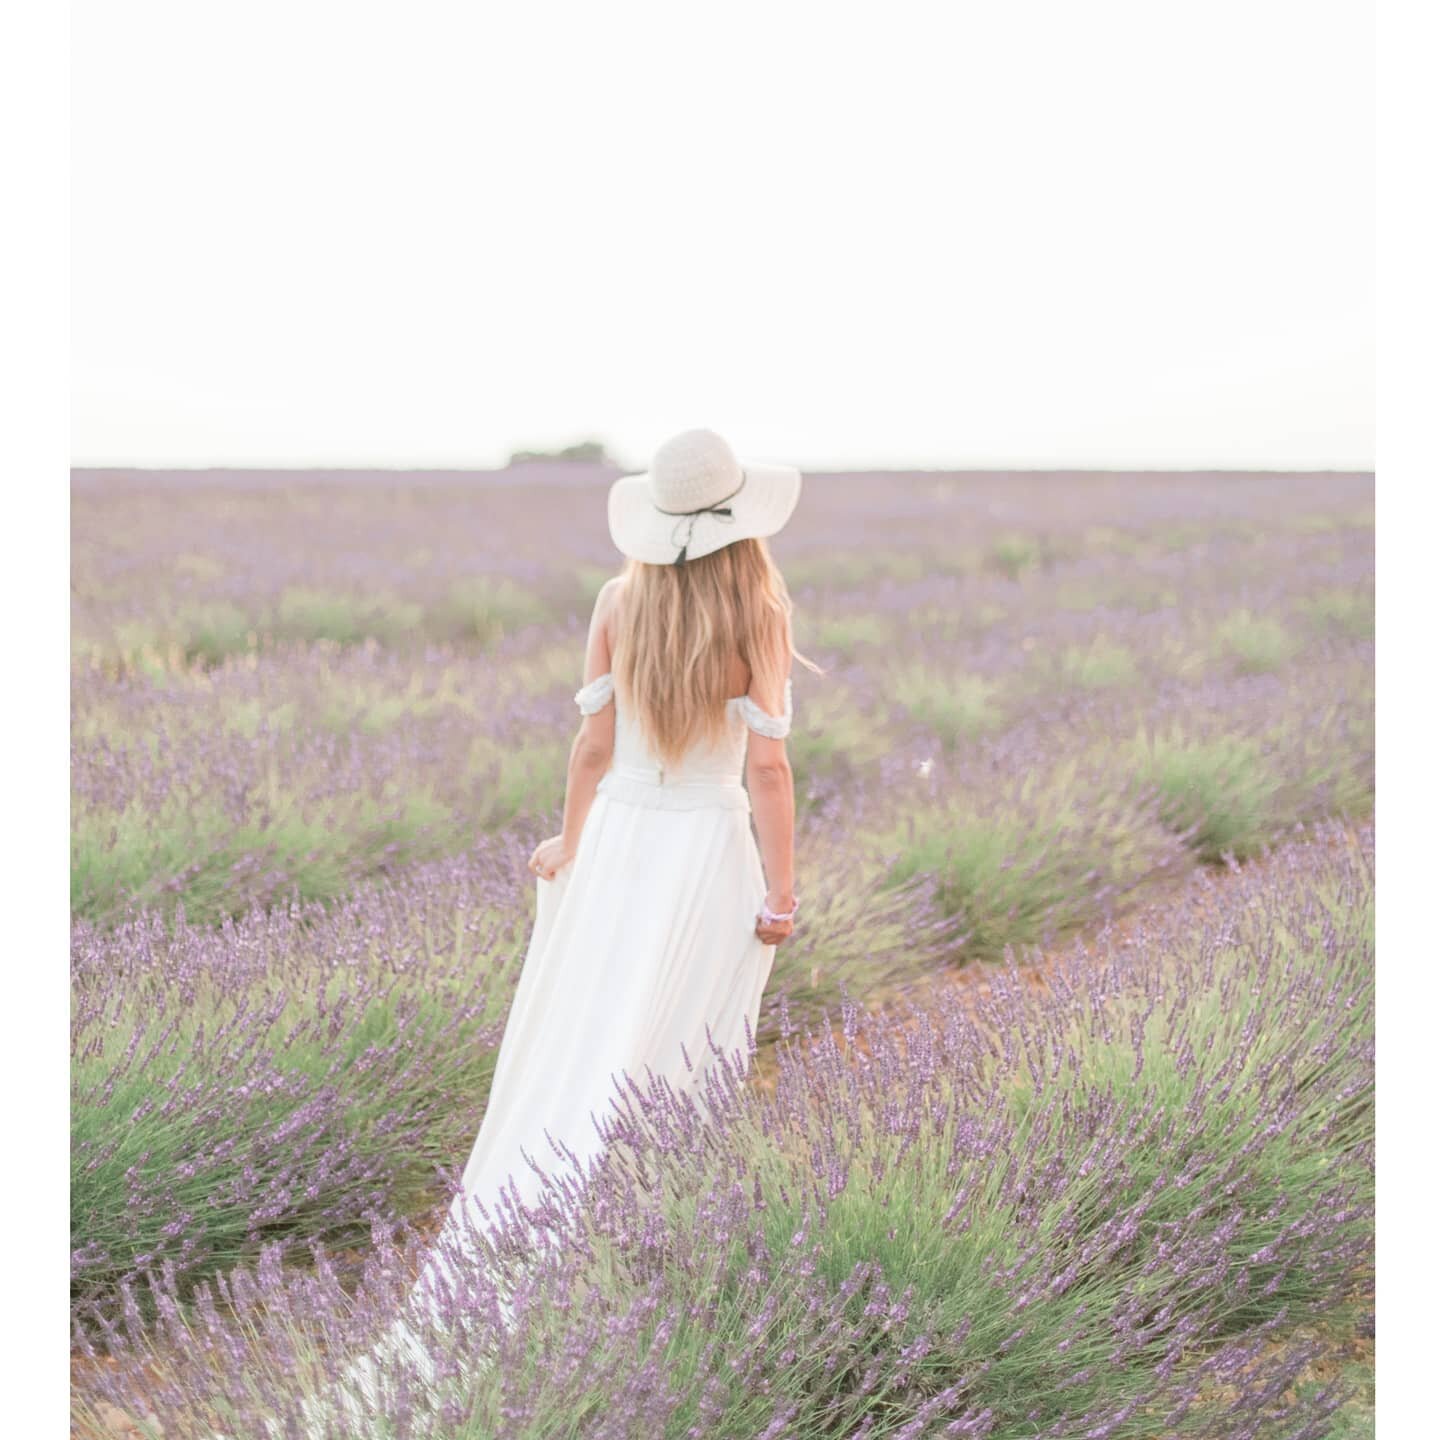 My dress &quot;Barcelone&quot; in the middle of the lavender !
Photo: @maddy.christina.photographer 
Planner: @oanaweddingdesign 
Models: @davidlbmodel 
Muha: @agnes_doussot 
#weddingdress #weddingdressdesigner #weddingdressParis #weddingdressfrance 